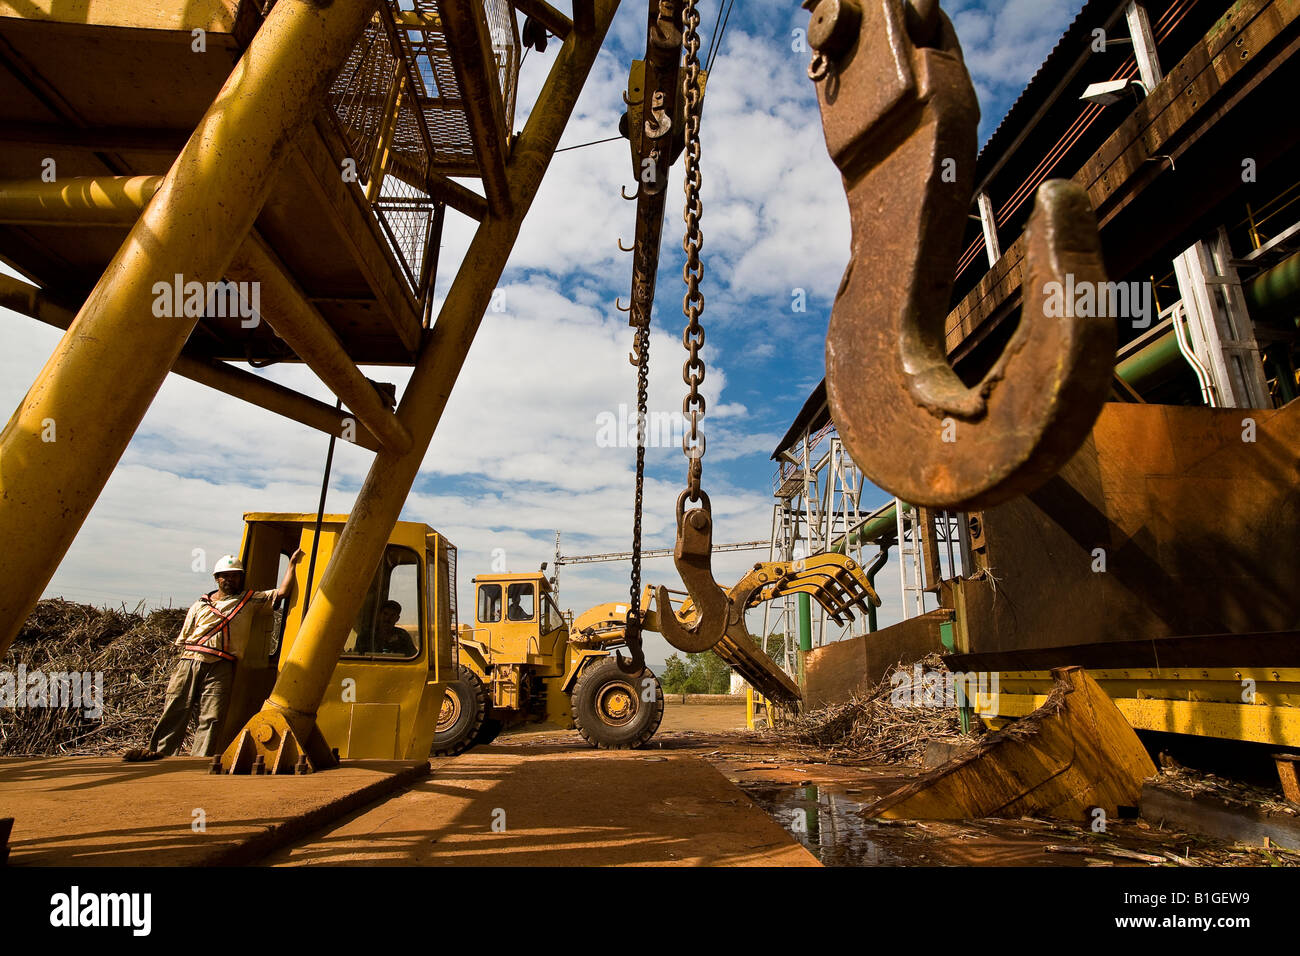 Sao Francisco ethanol and sugar plant Tractor feeds grinder with sugarcane Brazil May 2008 Stock Photo